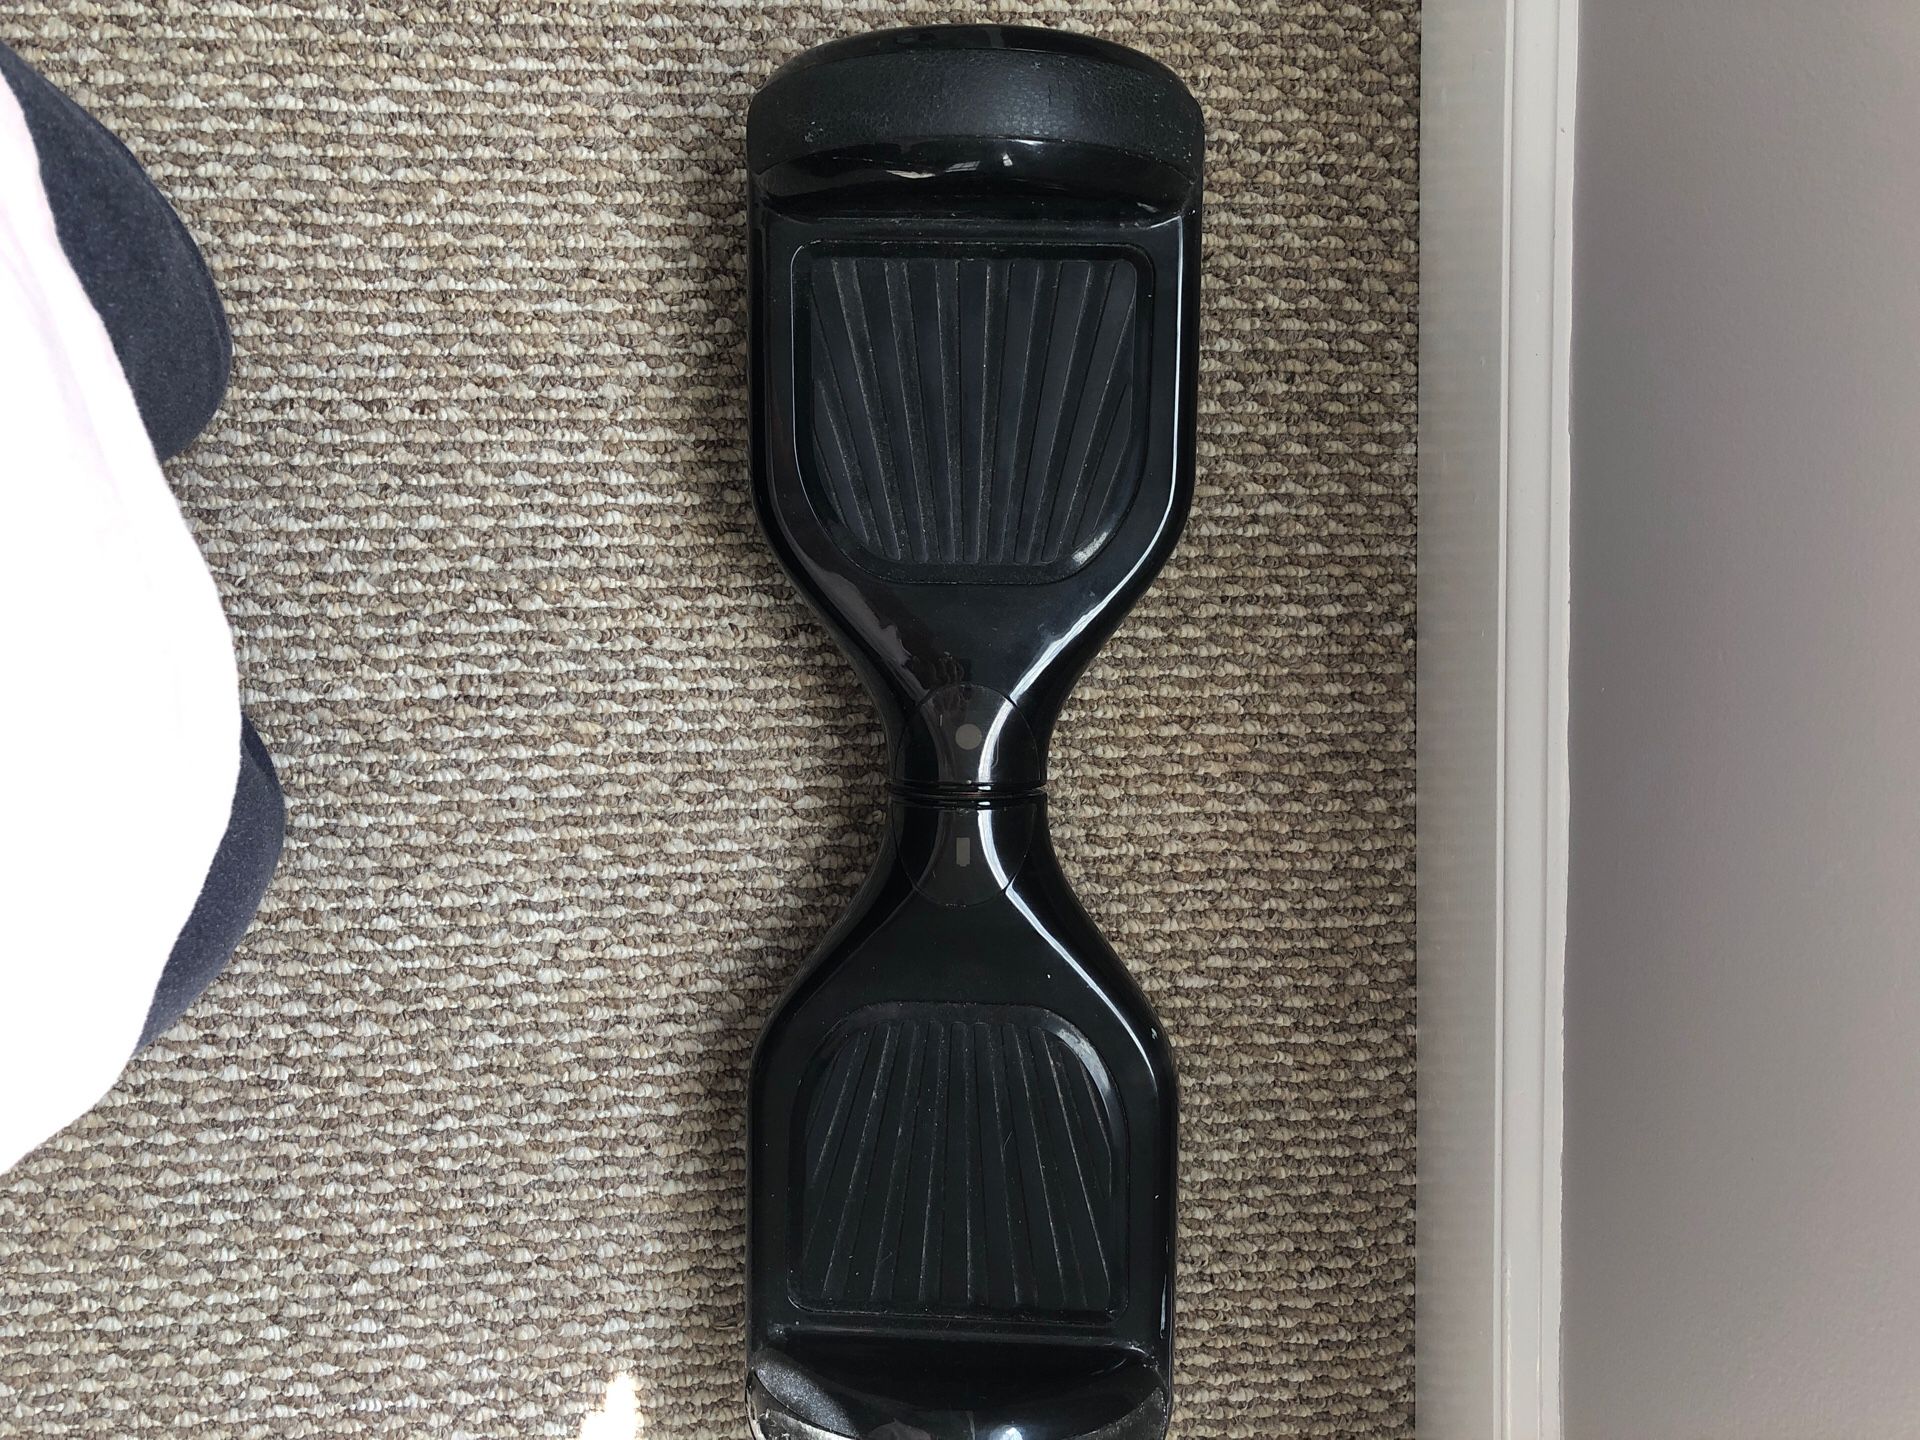 Glossy Black Hoverboard Scratched Up But Perfect Working Condition